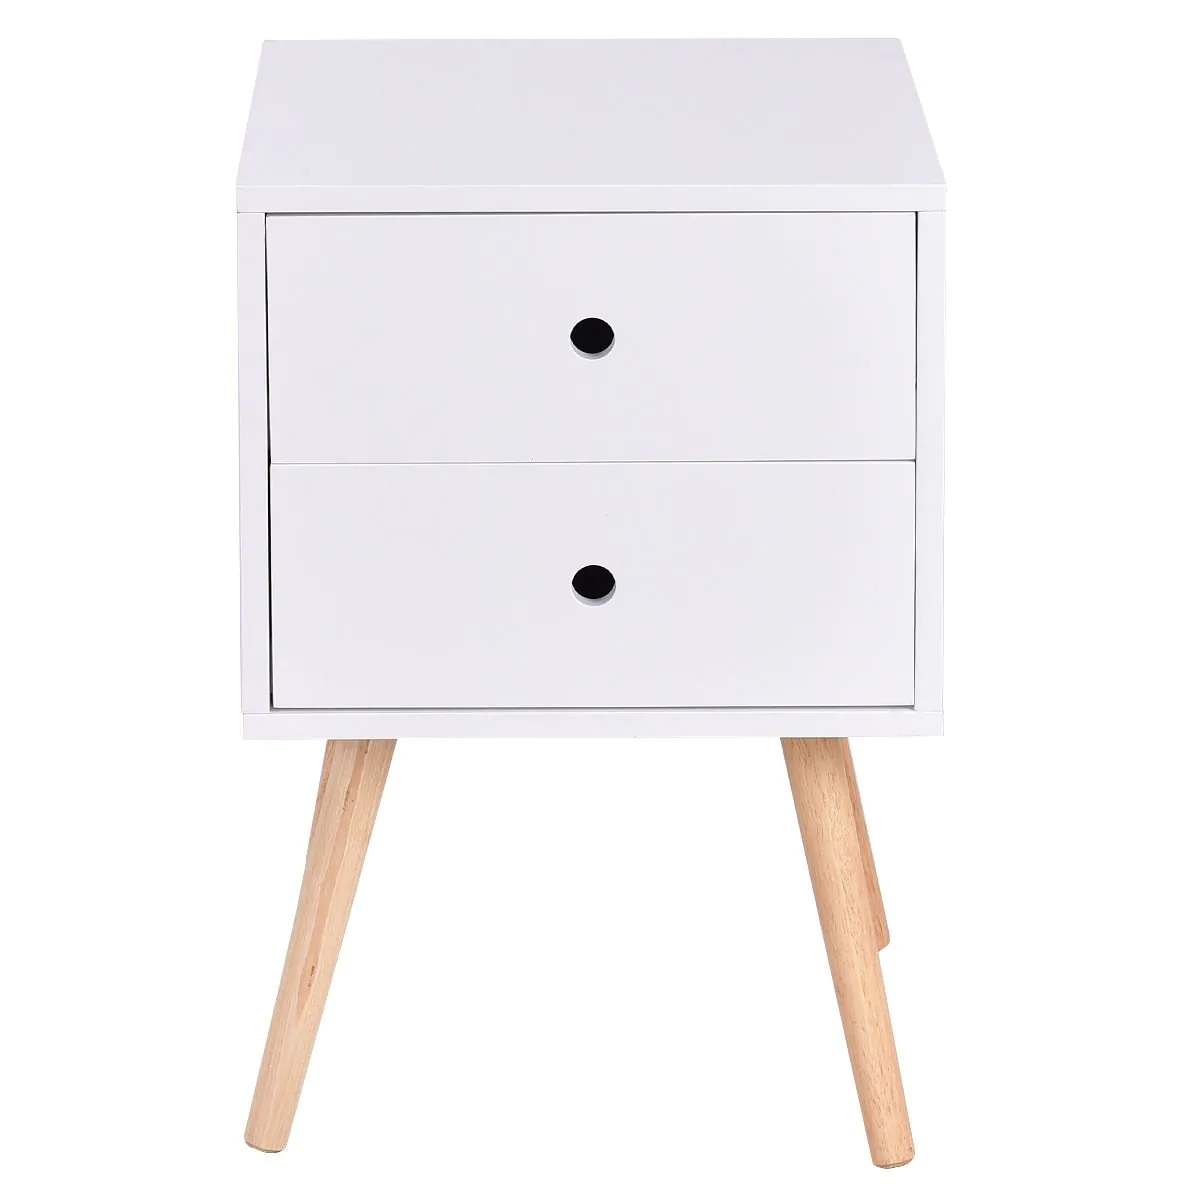 way white side end table nightstand drawers mid century accent wood furniture night free shipping today tablecloth measurements hall console wine cabinet patio chair covers target